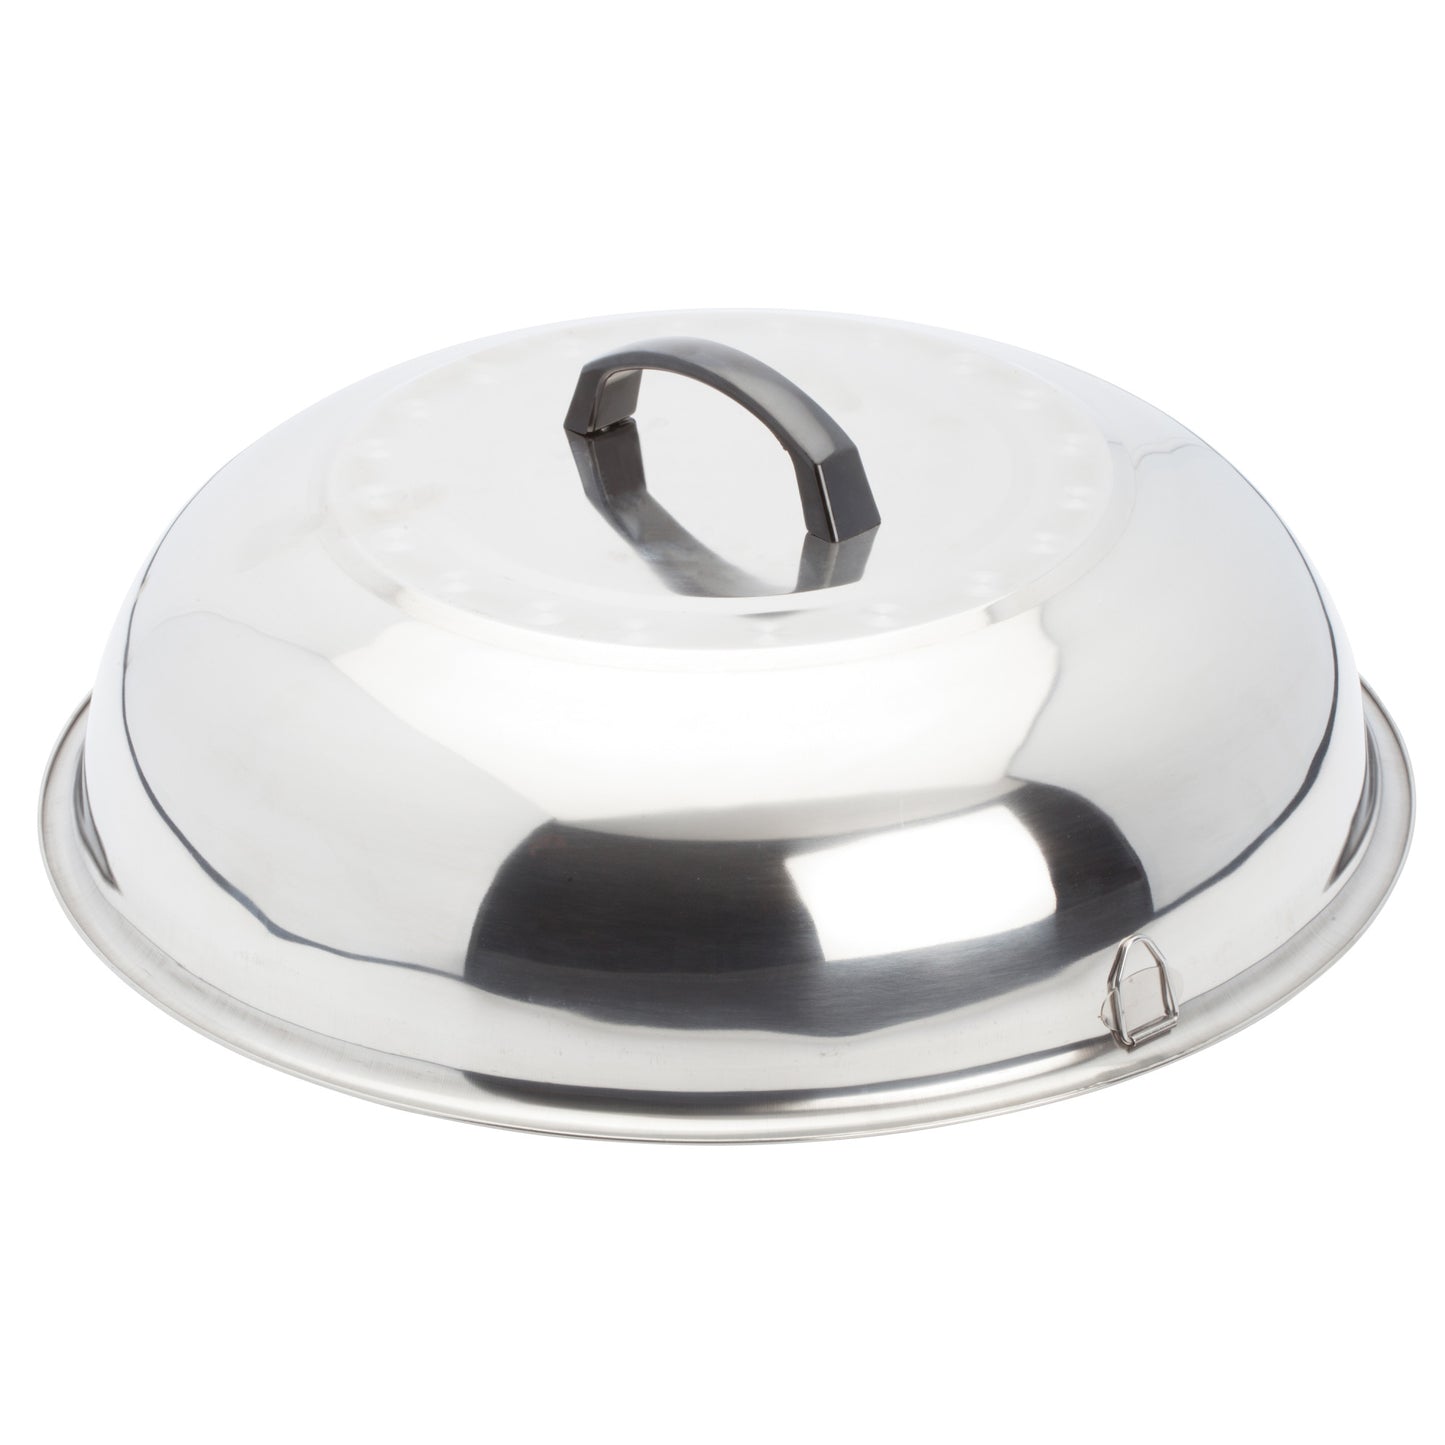 WKCS-15 - Stainless Steel Wok Cover - 15-3/8"